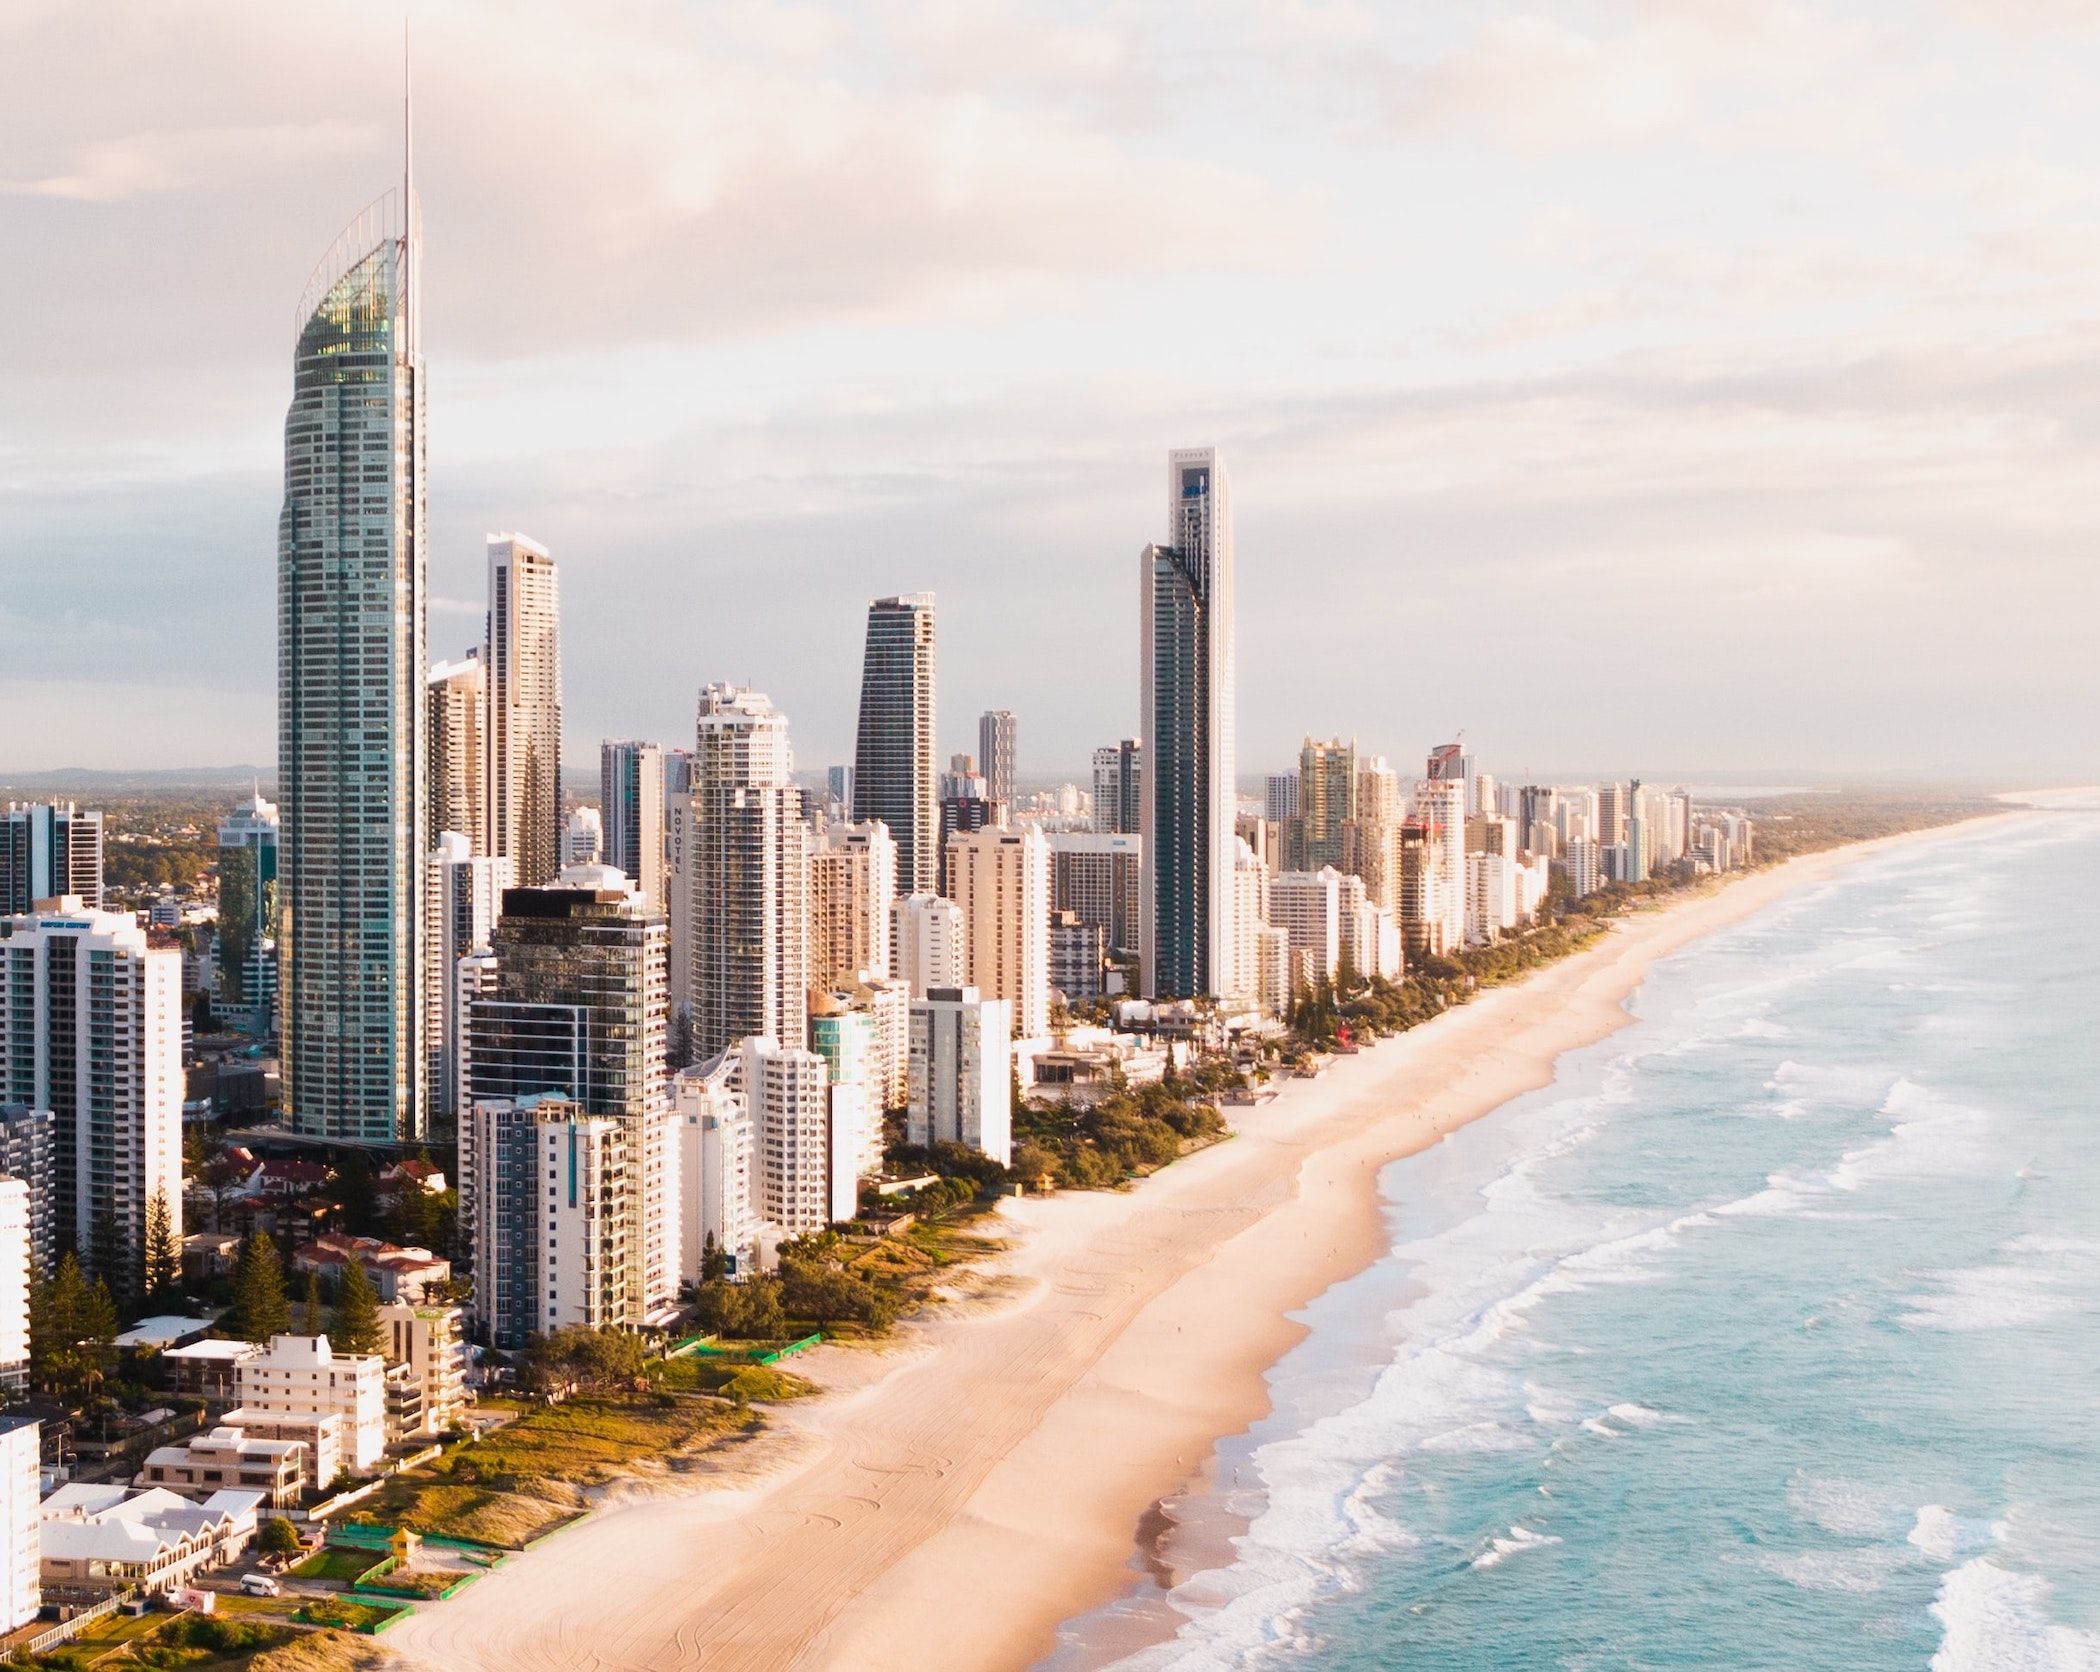 Flying to Gold Coast? Here are the best things to do in